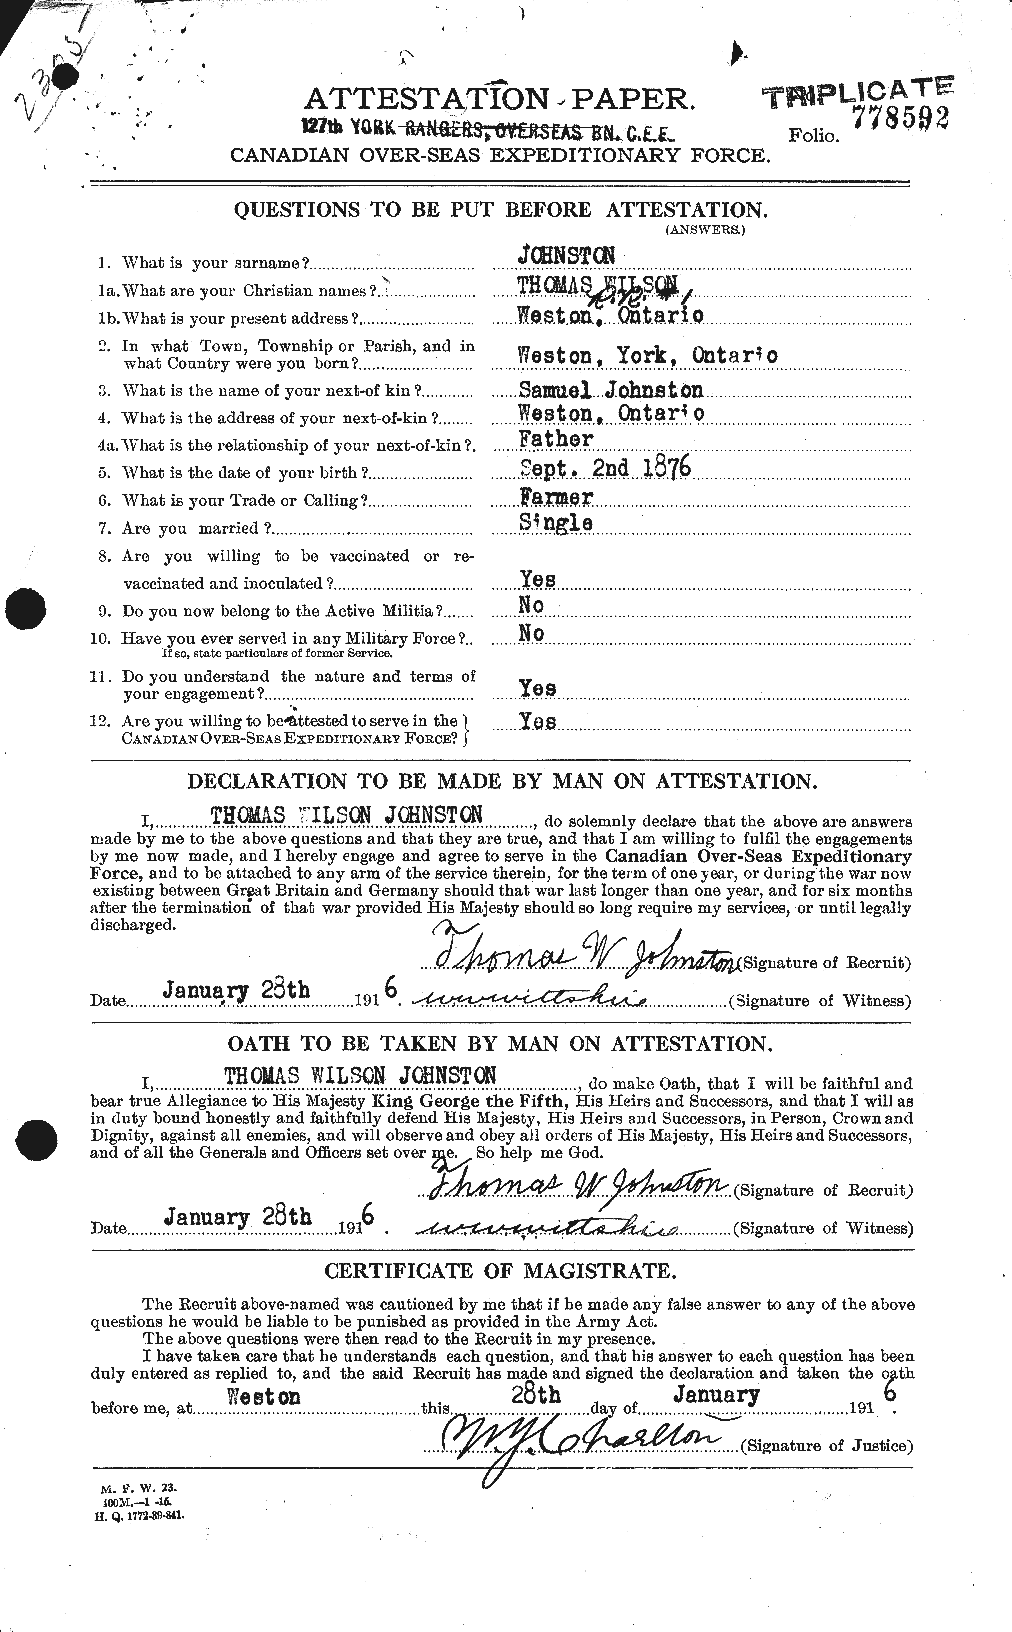 Personnel Records of the First World War - CEF 427180a